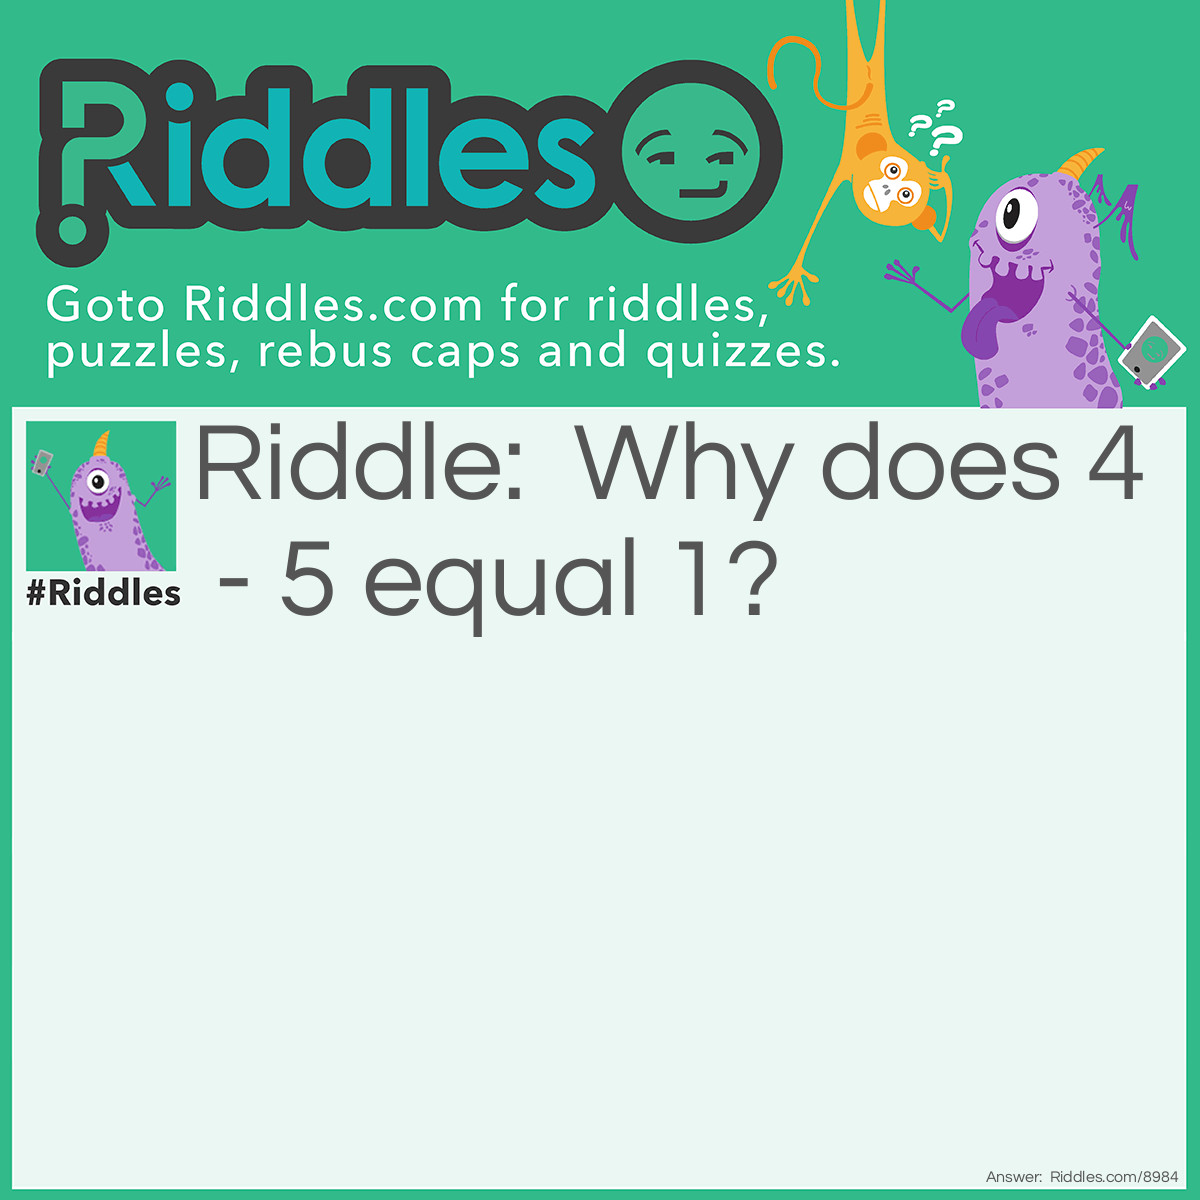 Riddle: Why does 4 - 5 equal 1? Answer: Because: IV - V = I (4 - 5 = 1)